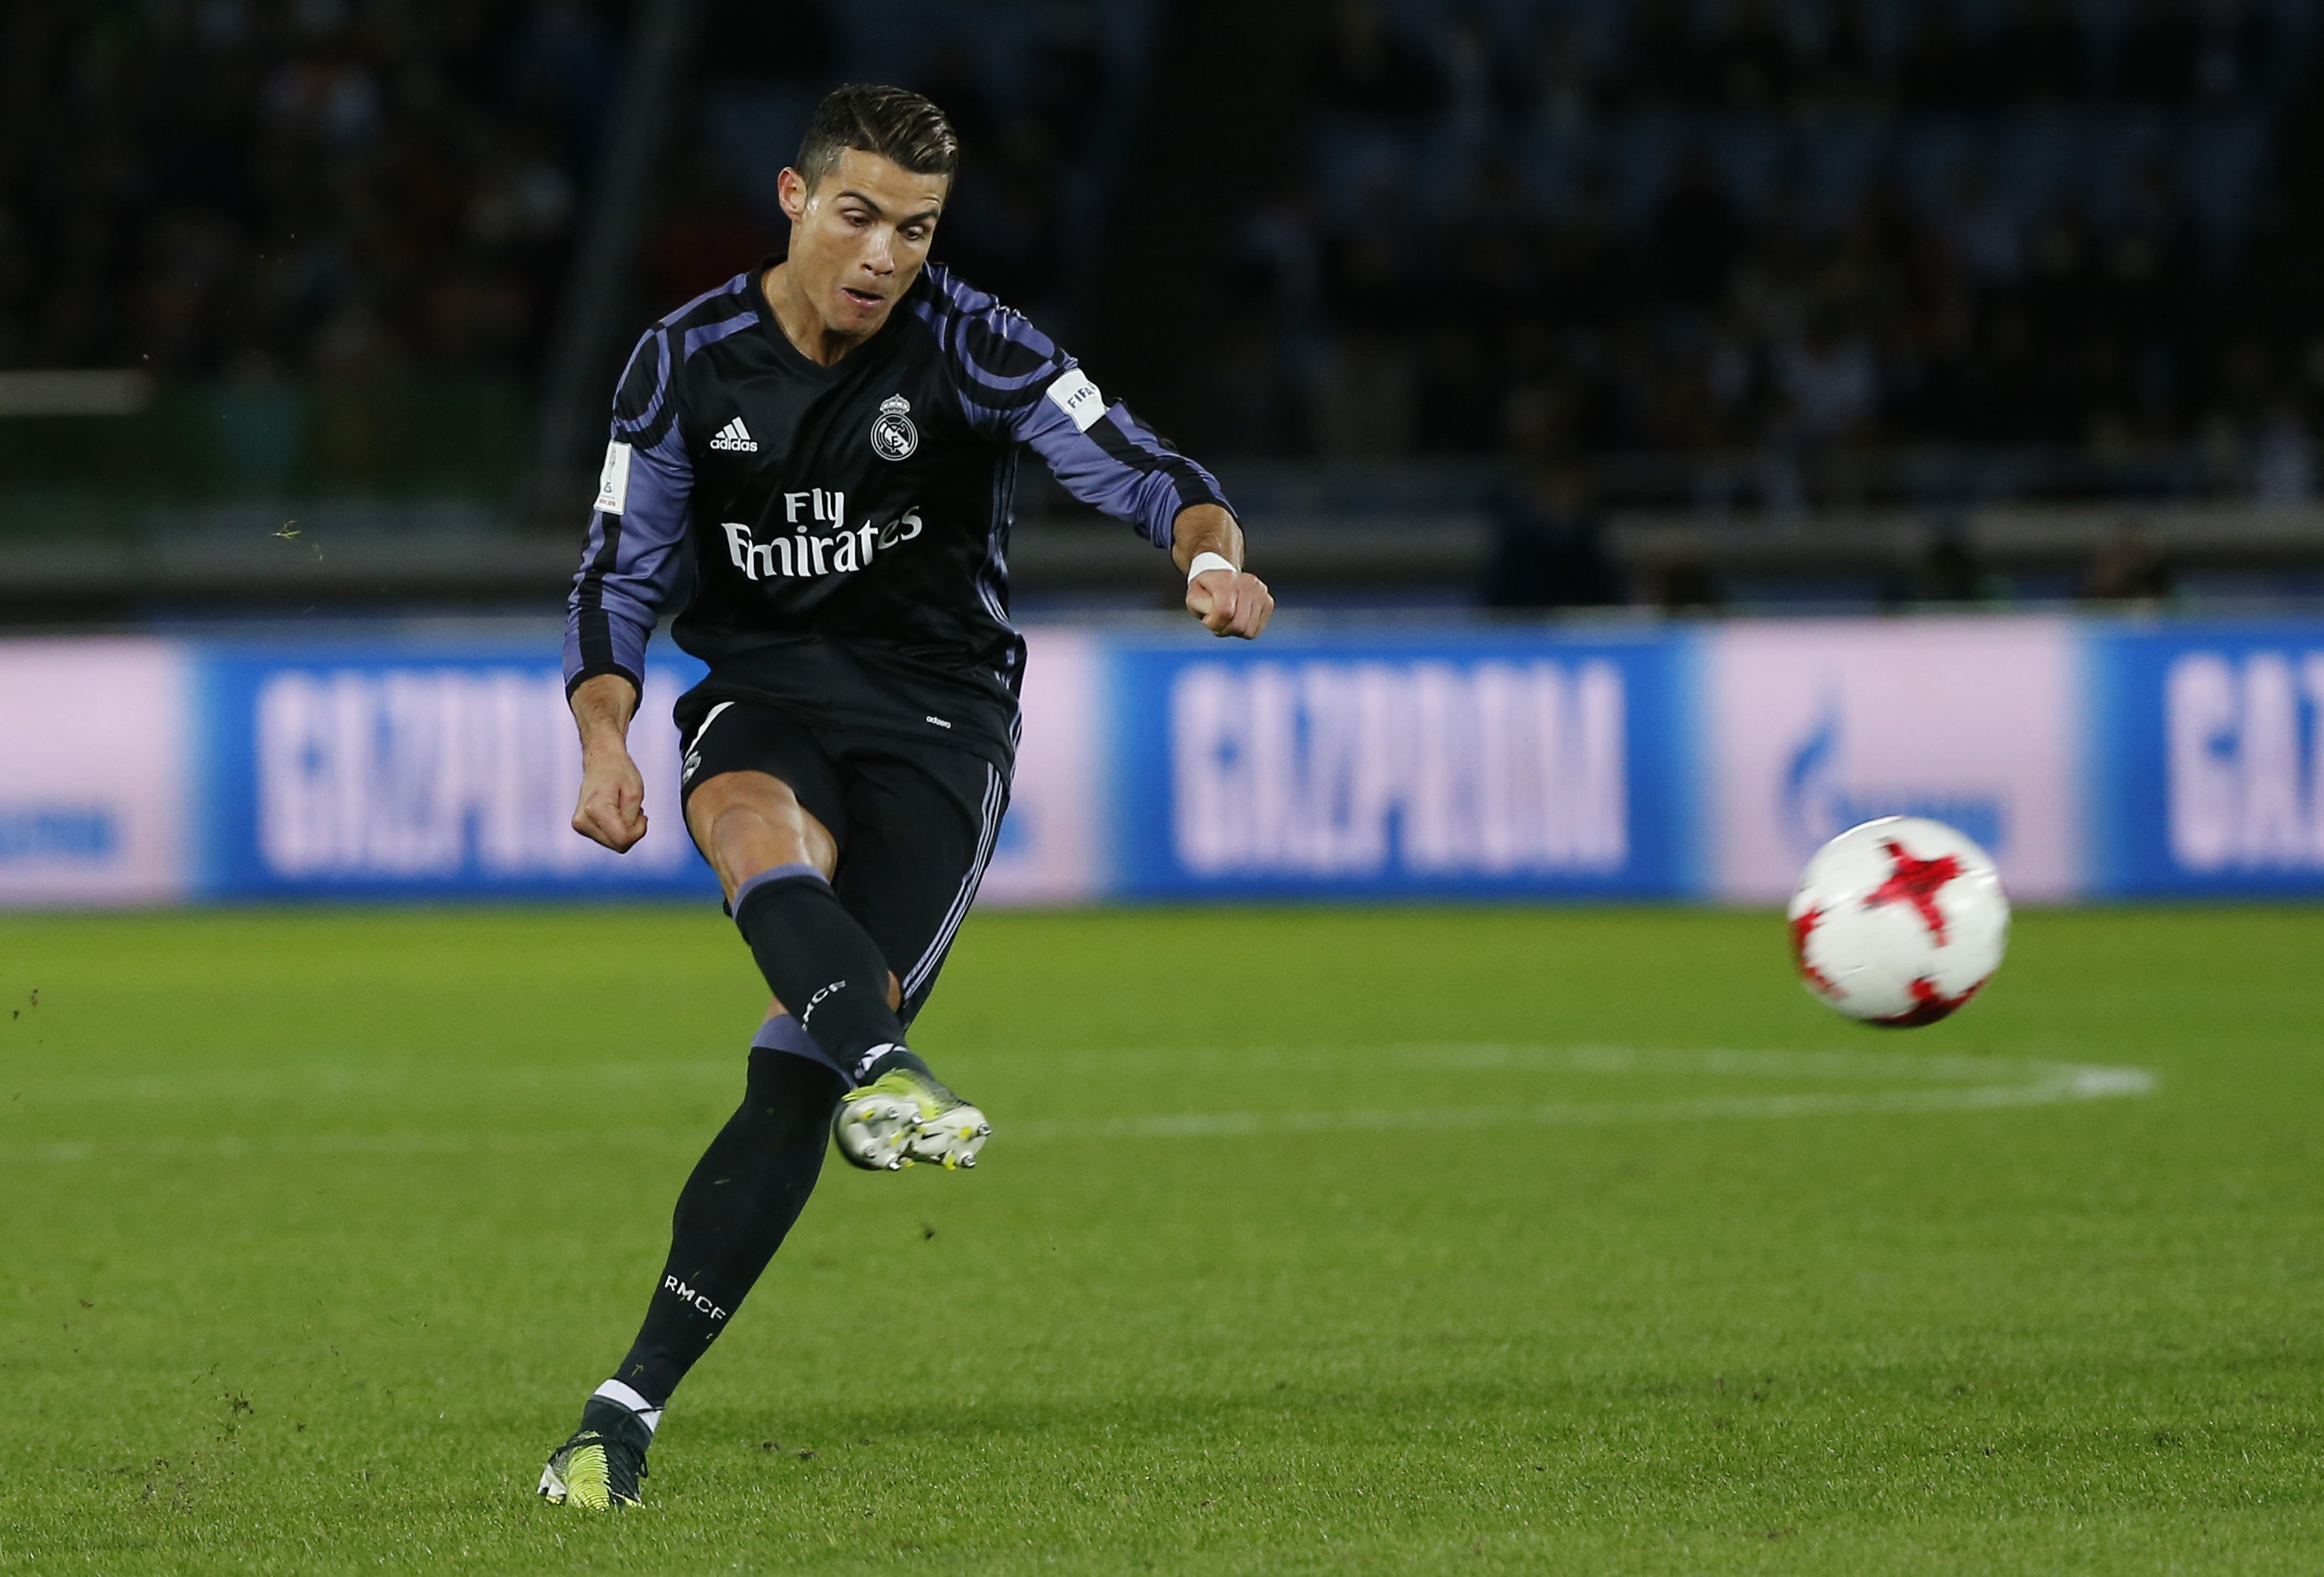 Real Madrid's Cristiano Ronaldo in action - SOCCER CLUBSEMI3